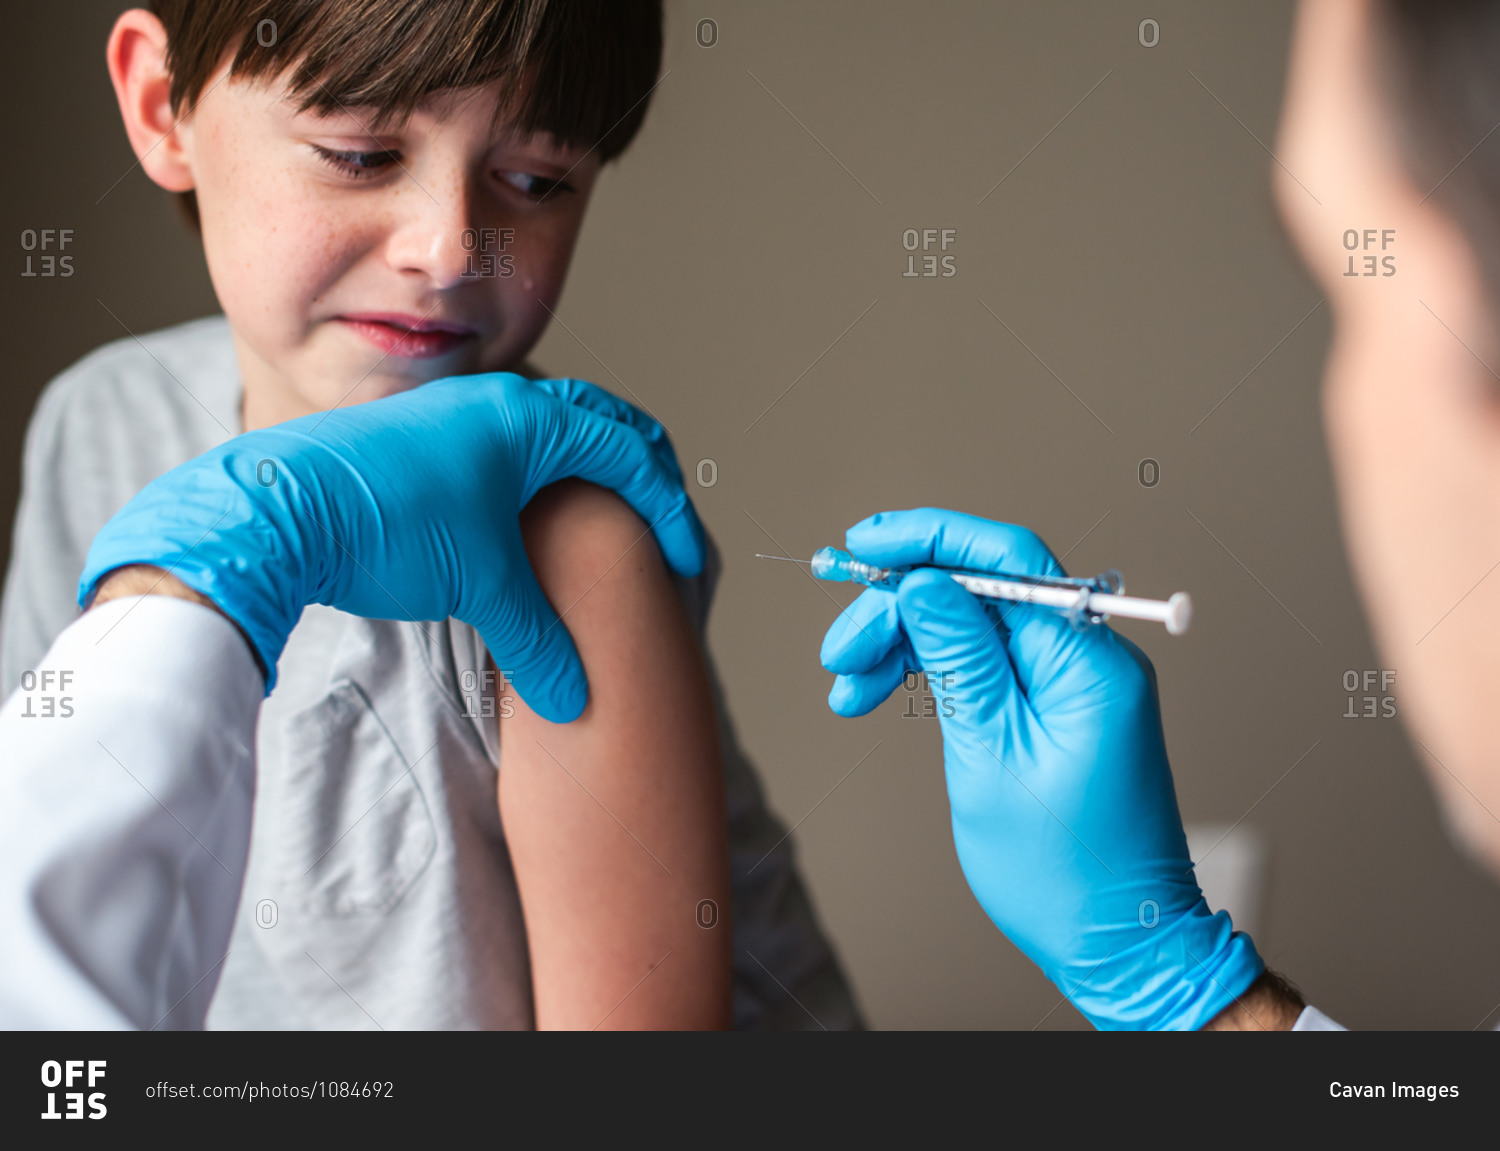 Nervous looking child getting vaccinated by doctor holding a needle.